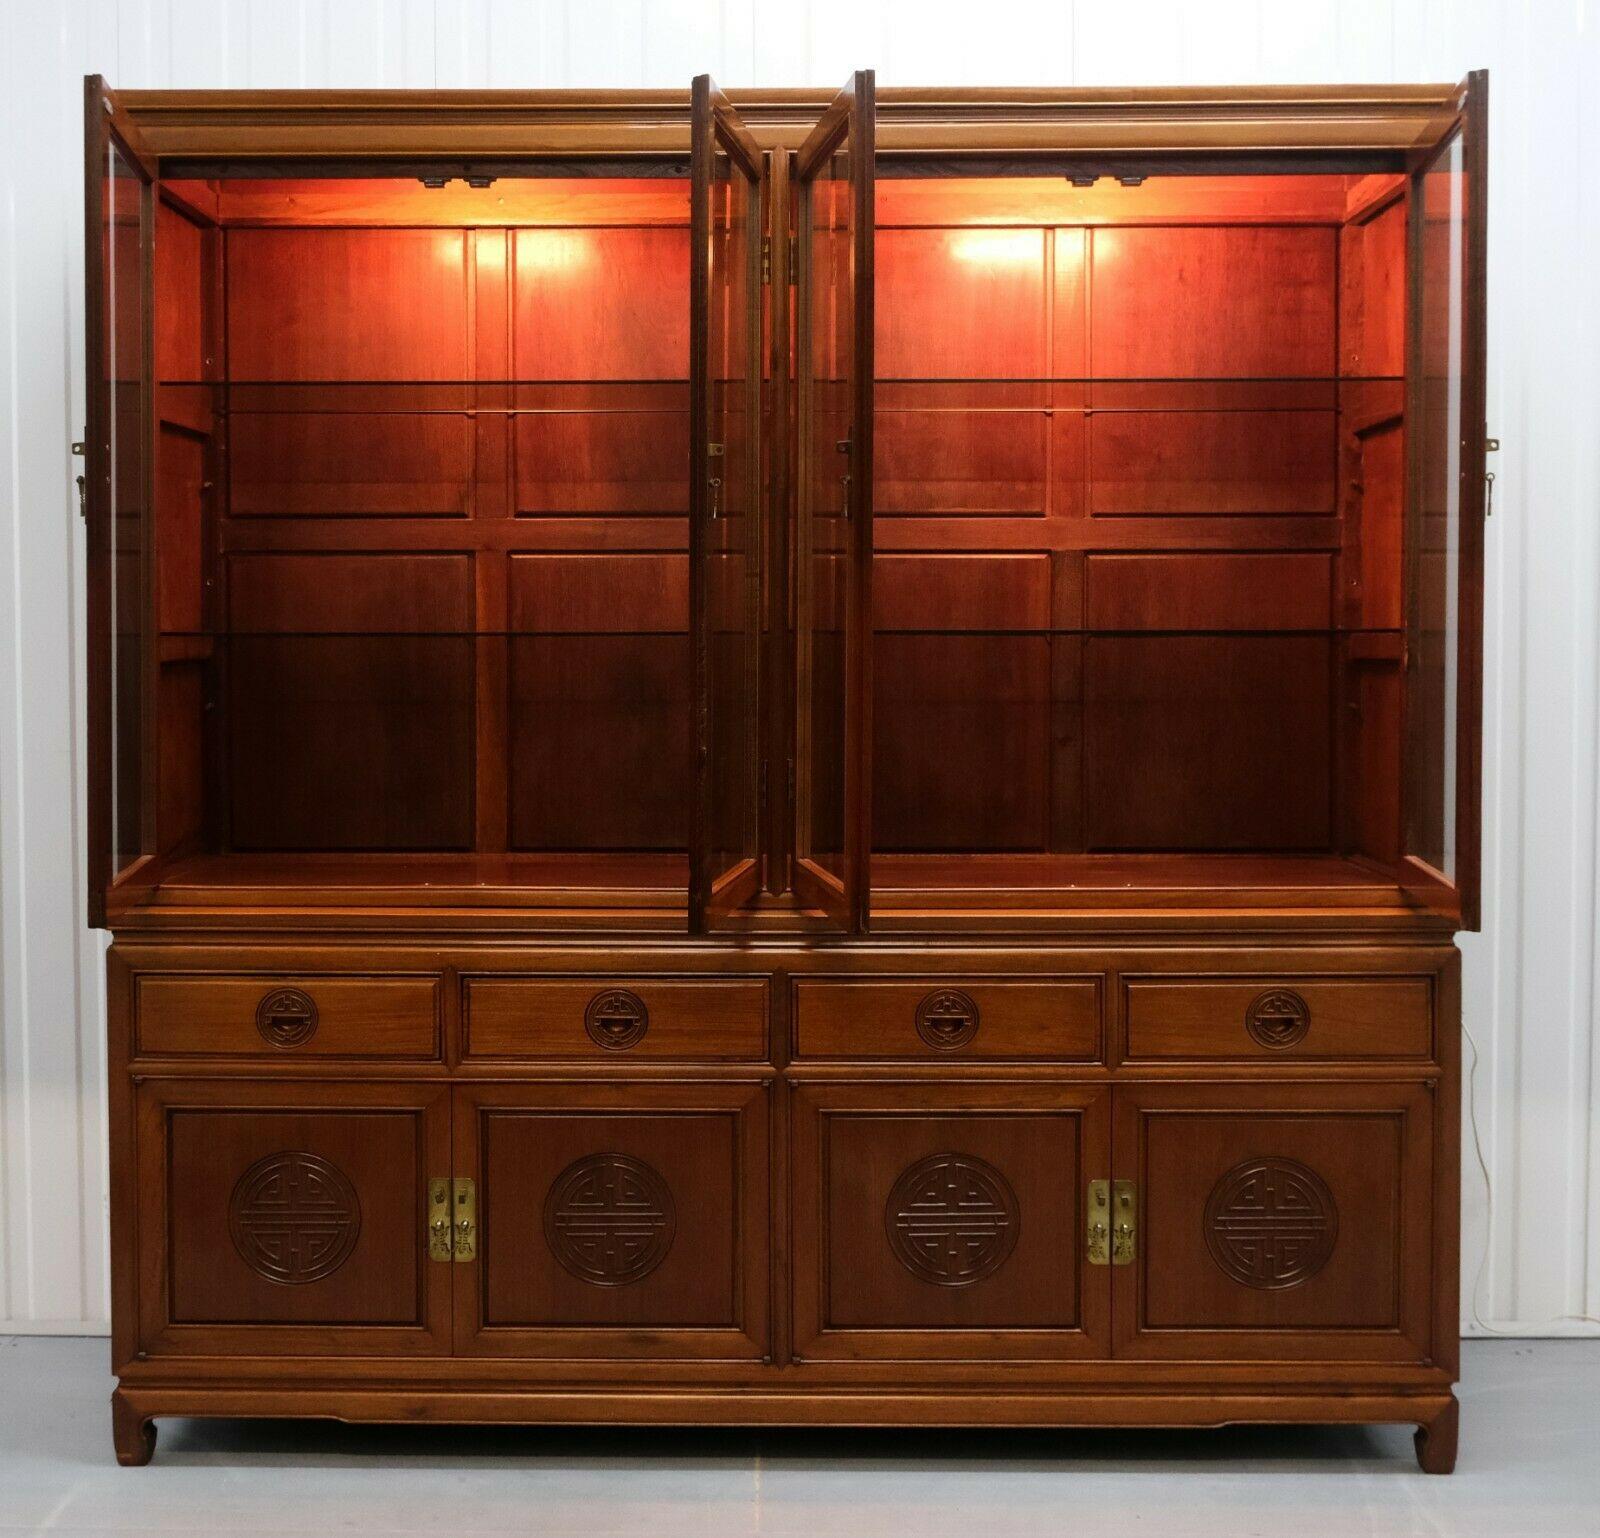 Hand-Crafted Stunning Chinese Hardwood Sideboard with Glass Shelves Carving Details & Lights